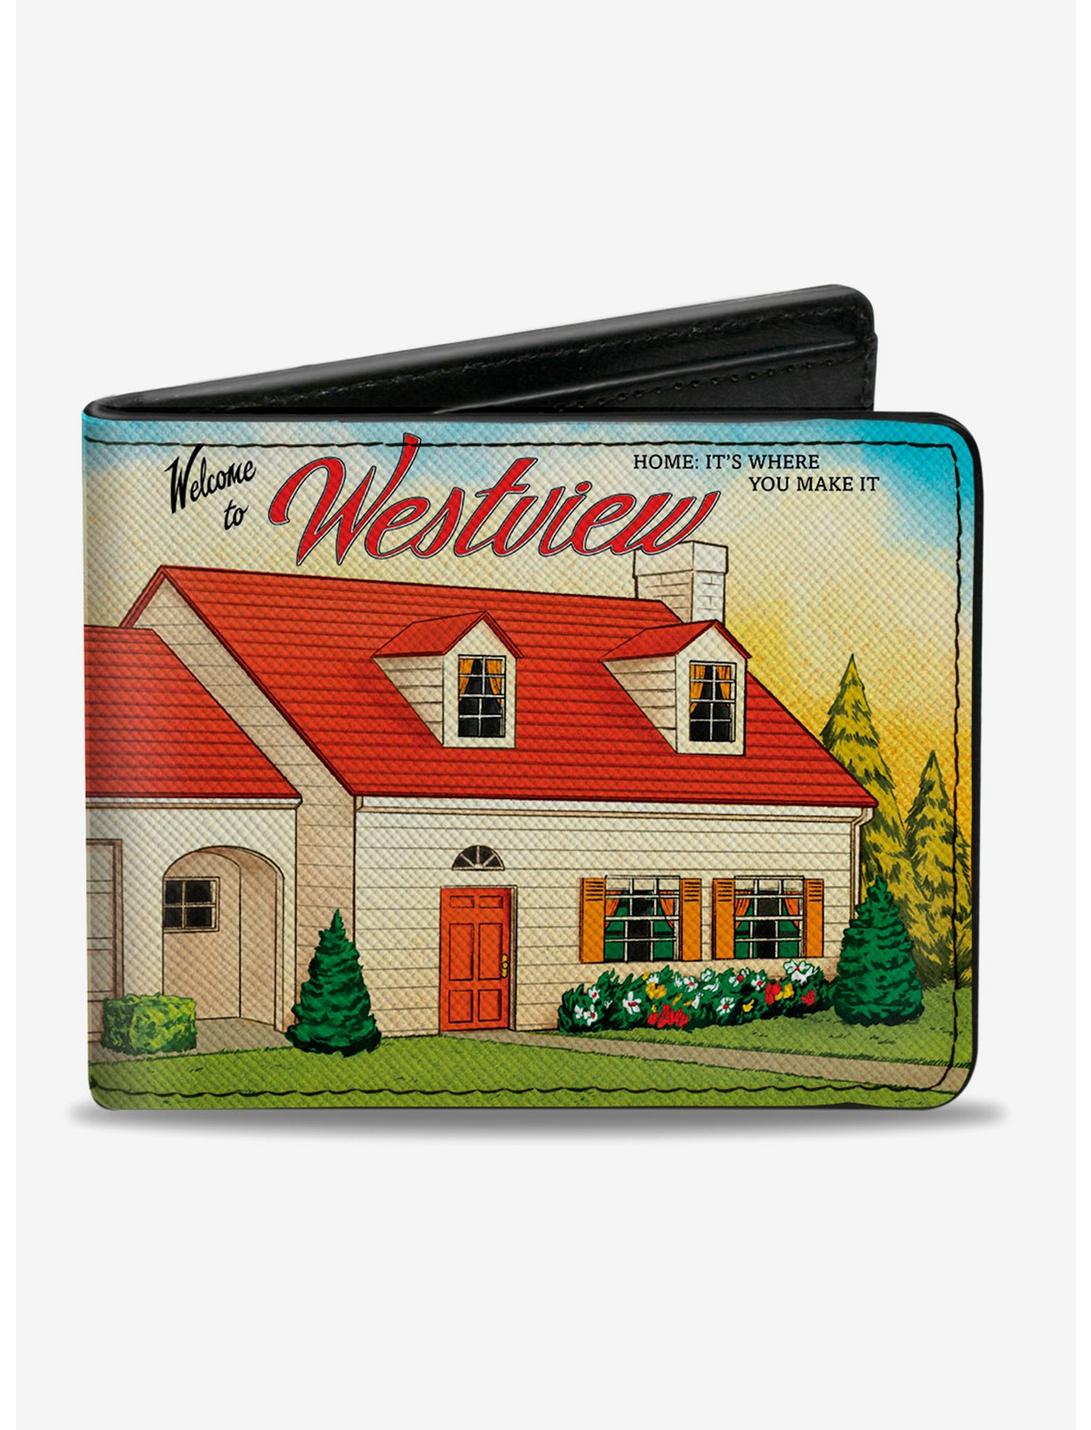 Marvel Wandavision House Welcome To Westview Bifold Wallet, , hi-res